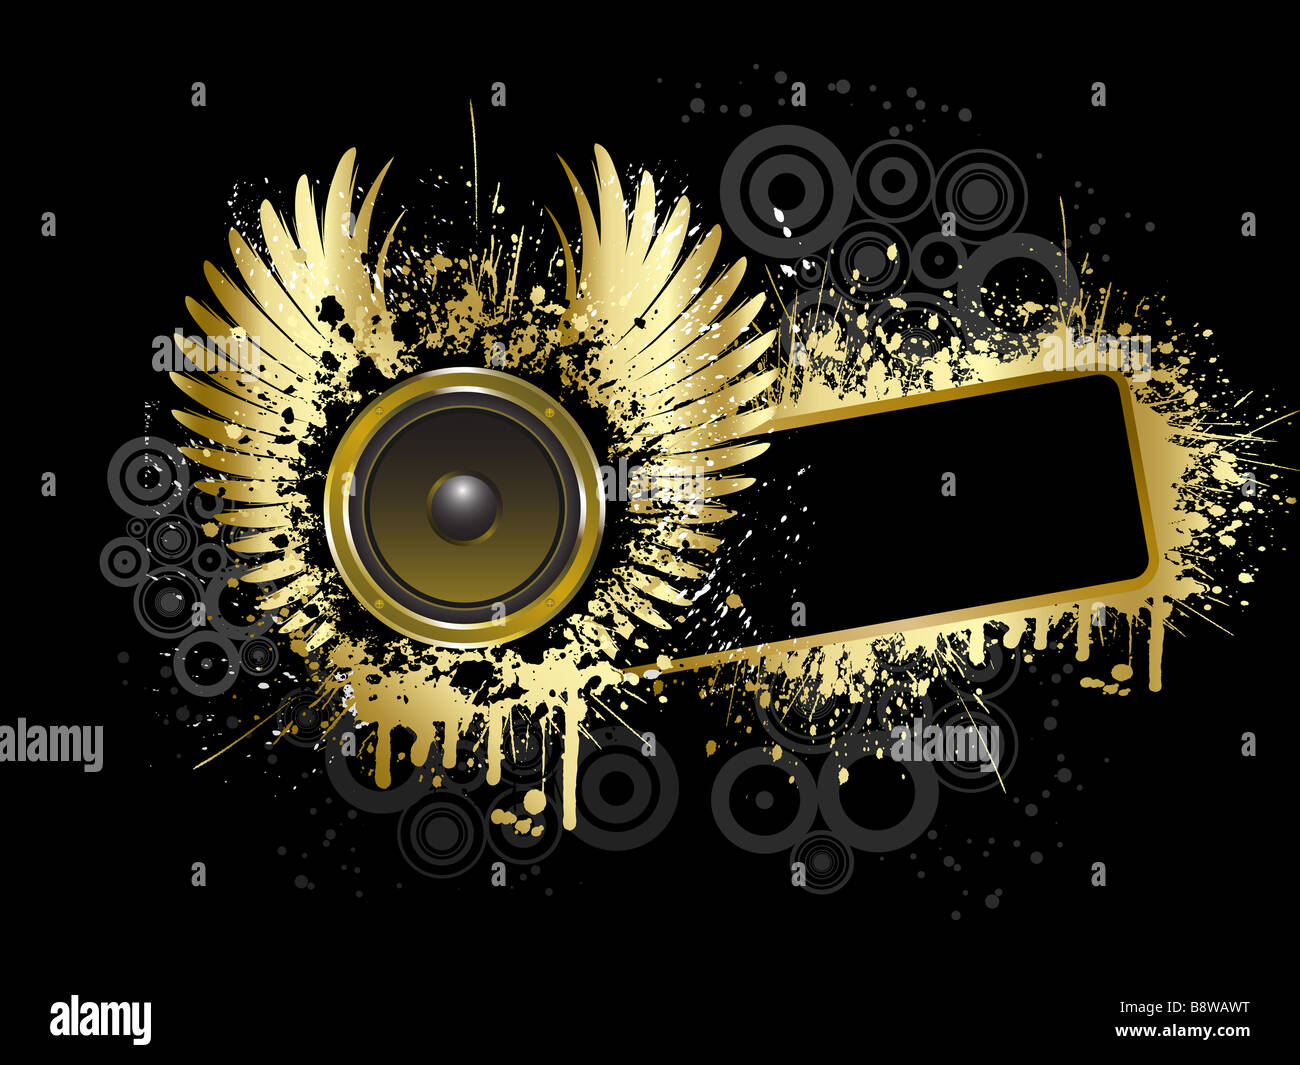 Grunge music background in gold and black Stock Photo - Alamy